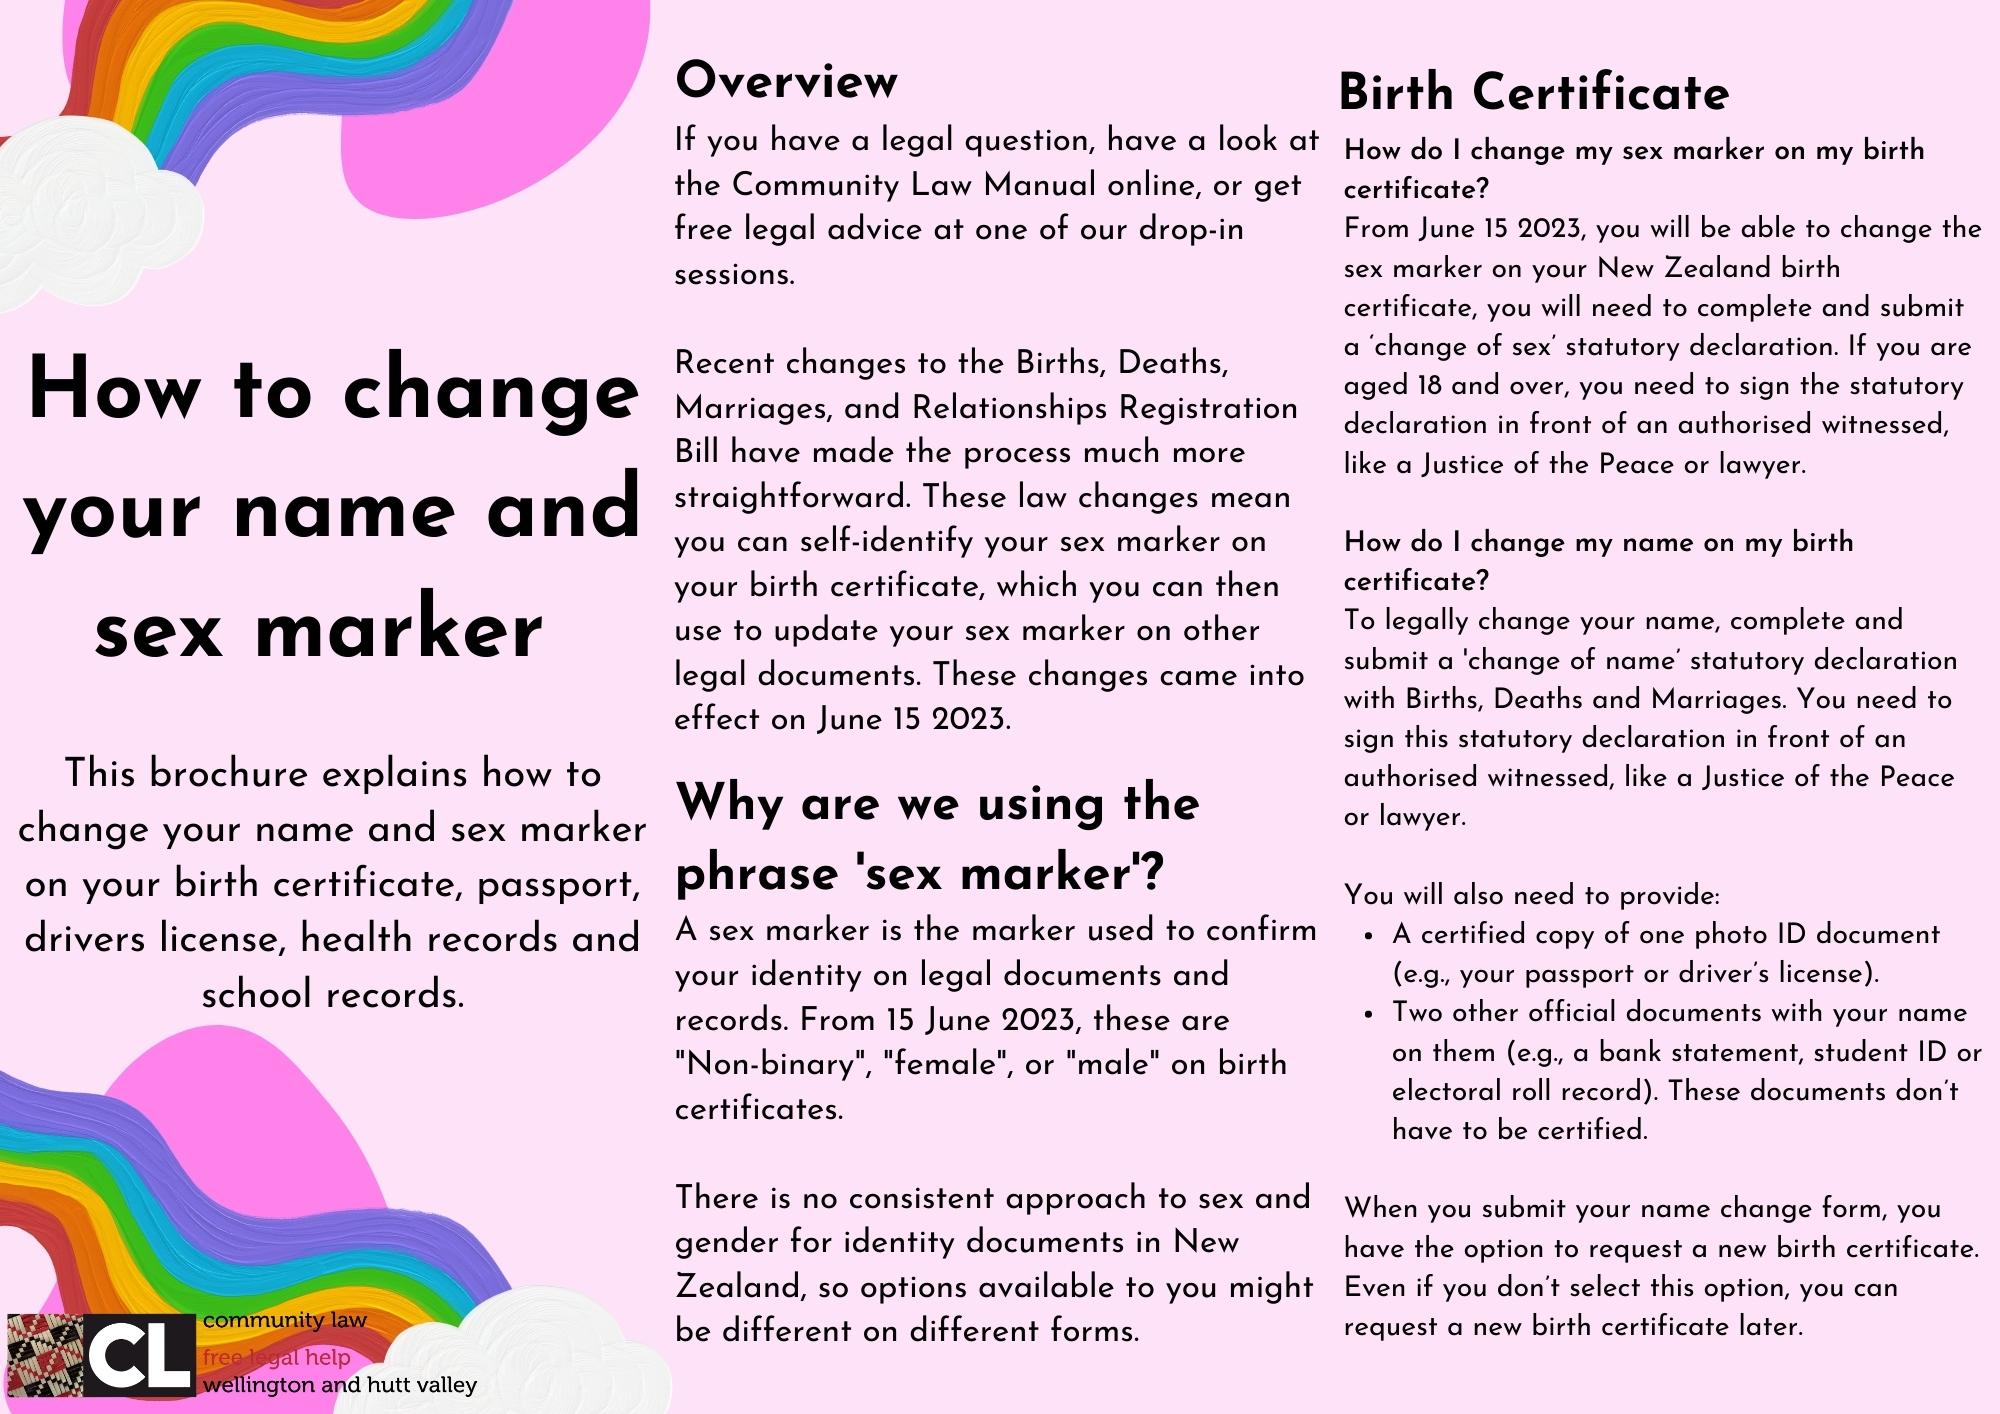 instuctions on how to change your name and sex marker on legal documents